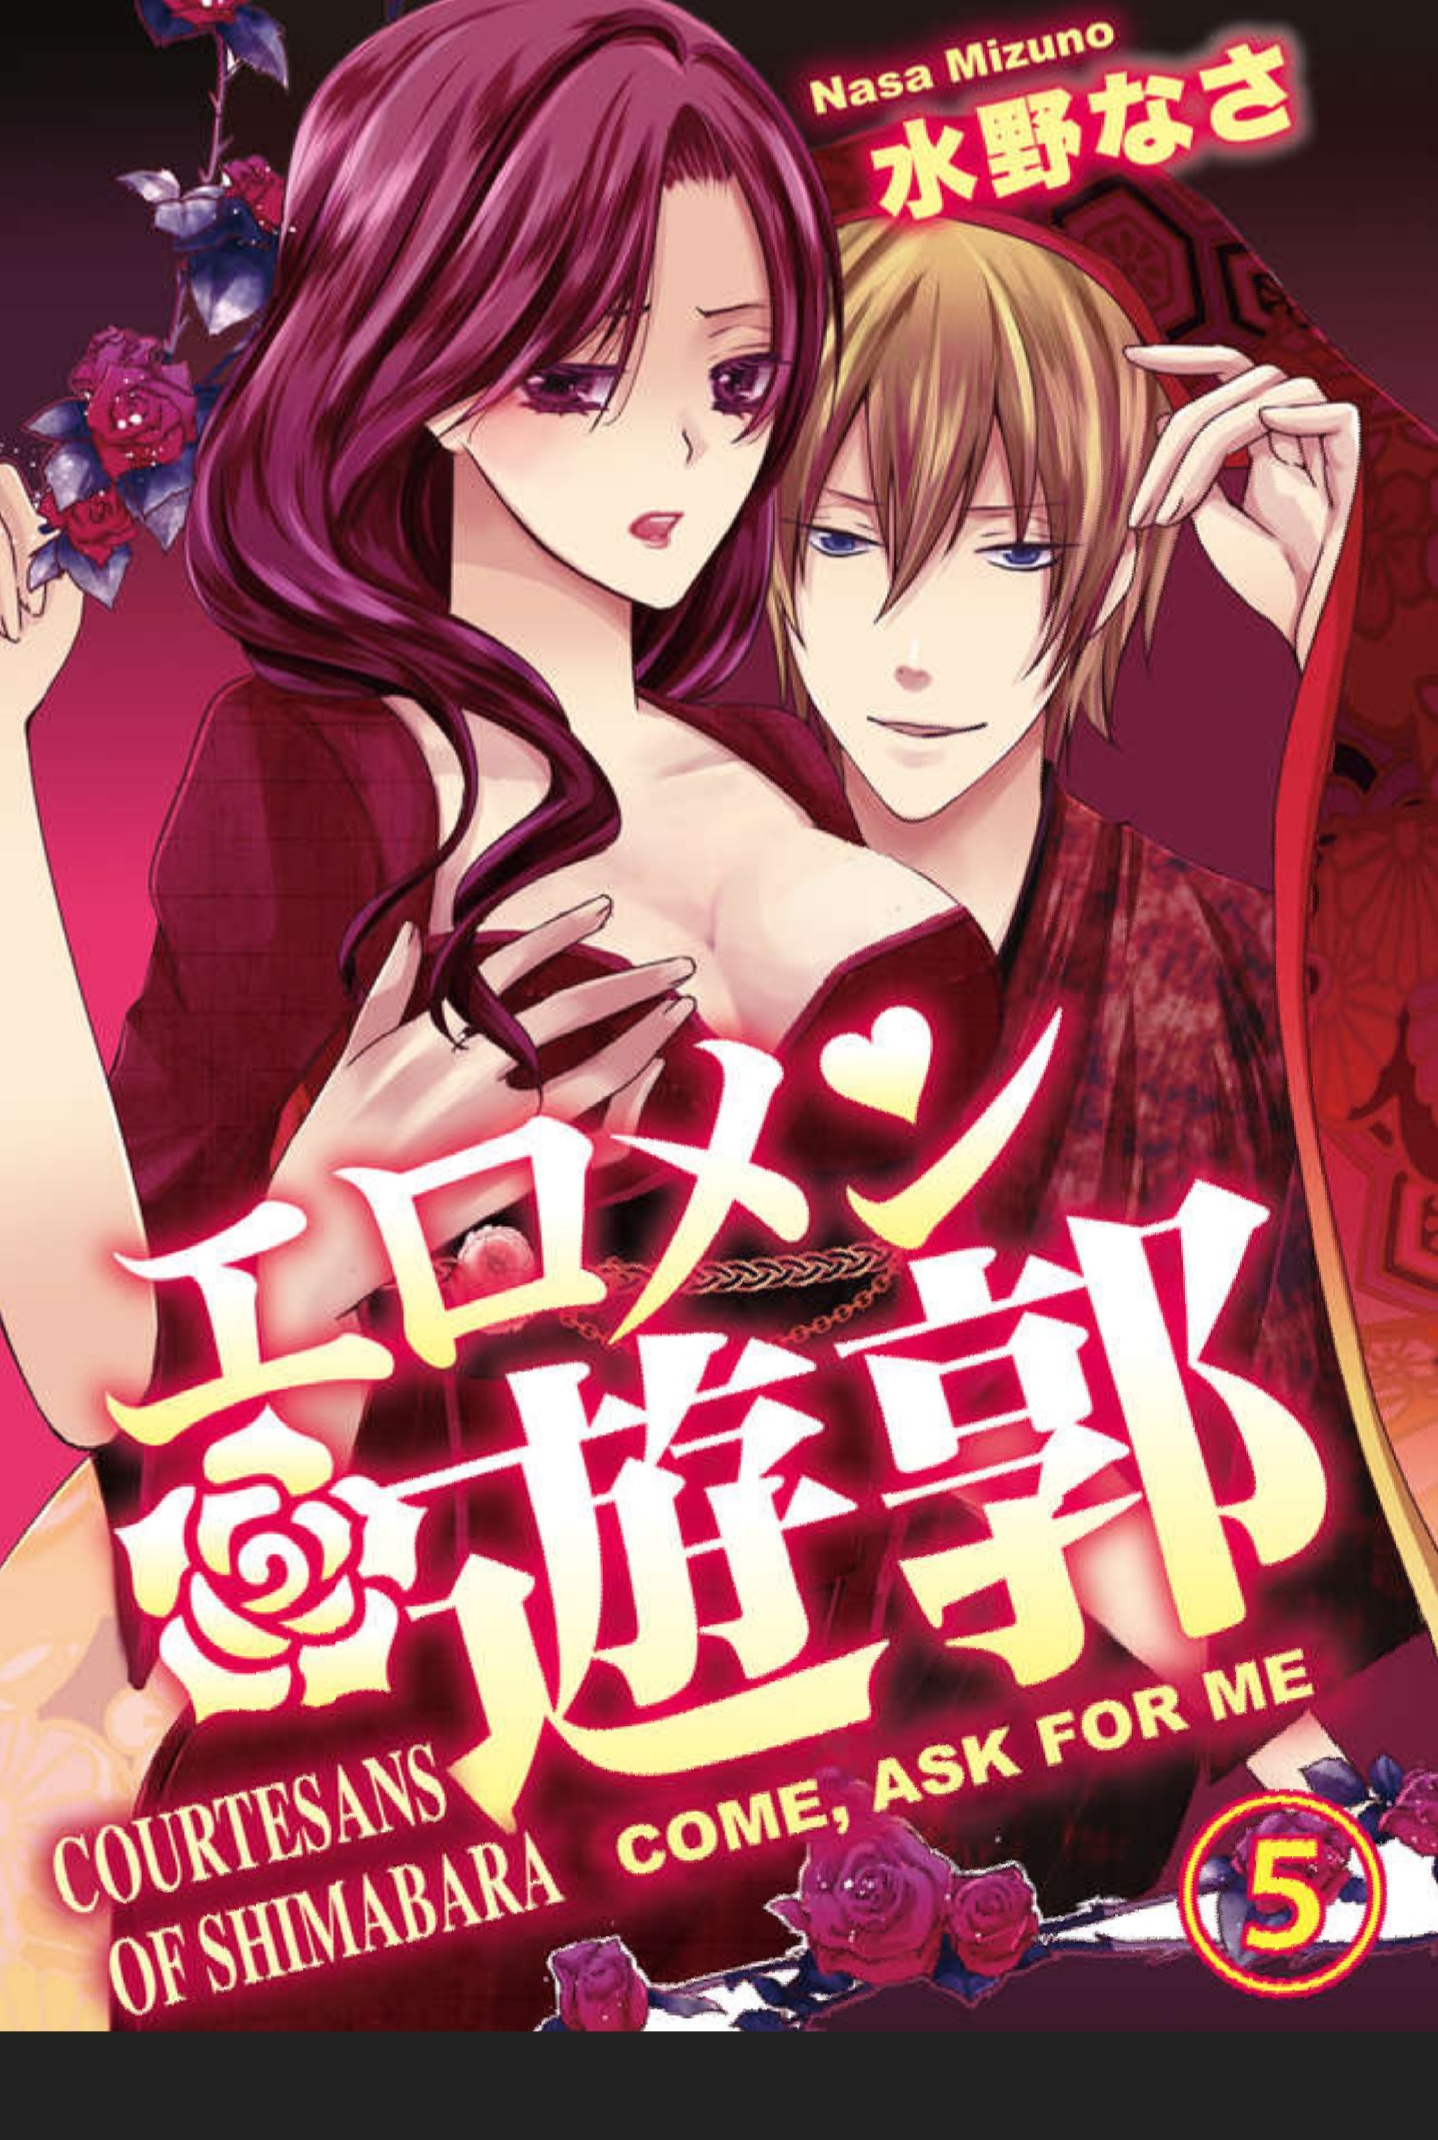 Courtesans of Shimabara - Come, Ask for Me Ch.05